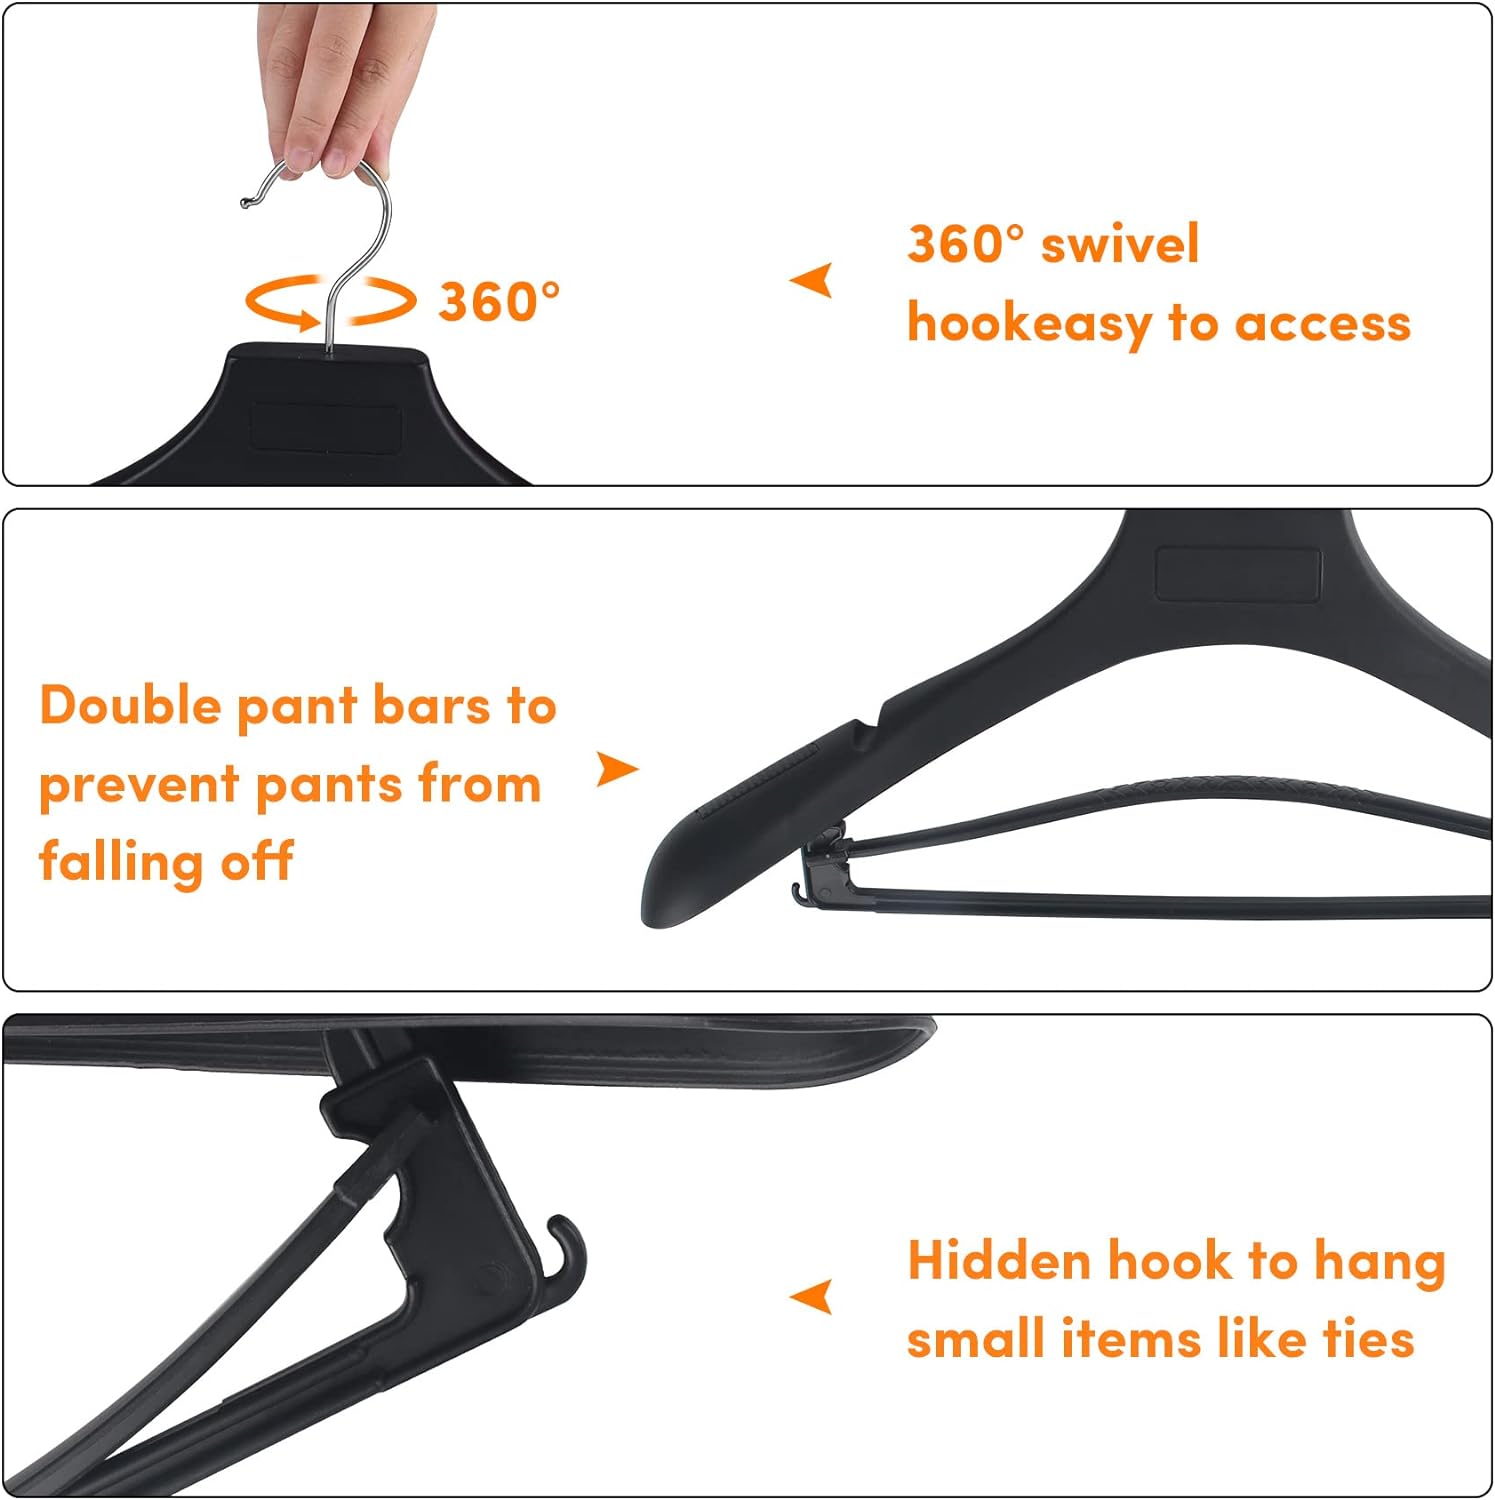 10 Non-slip Plastic Clothes Hangers For Home Bedrooms And Dormitories, Thick  Non-bulging Clothes Stays, Wide Shoulder Clothes Hangers Wholesale